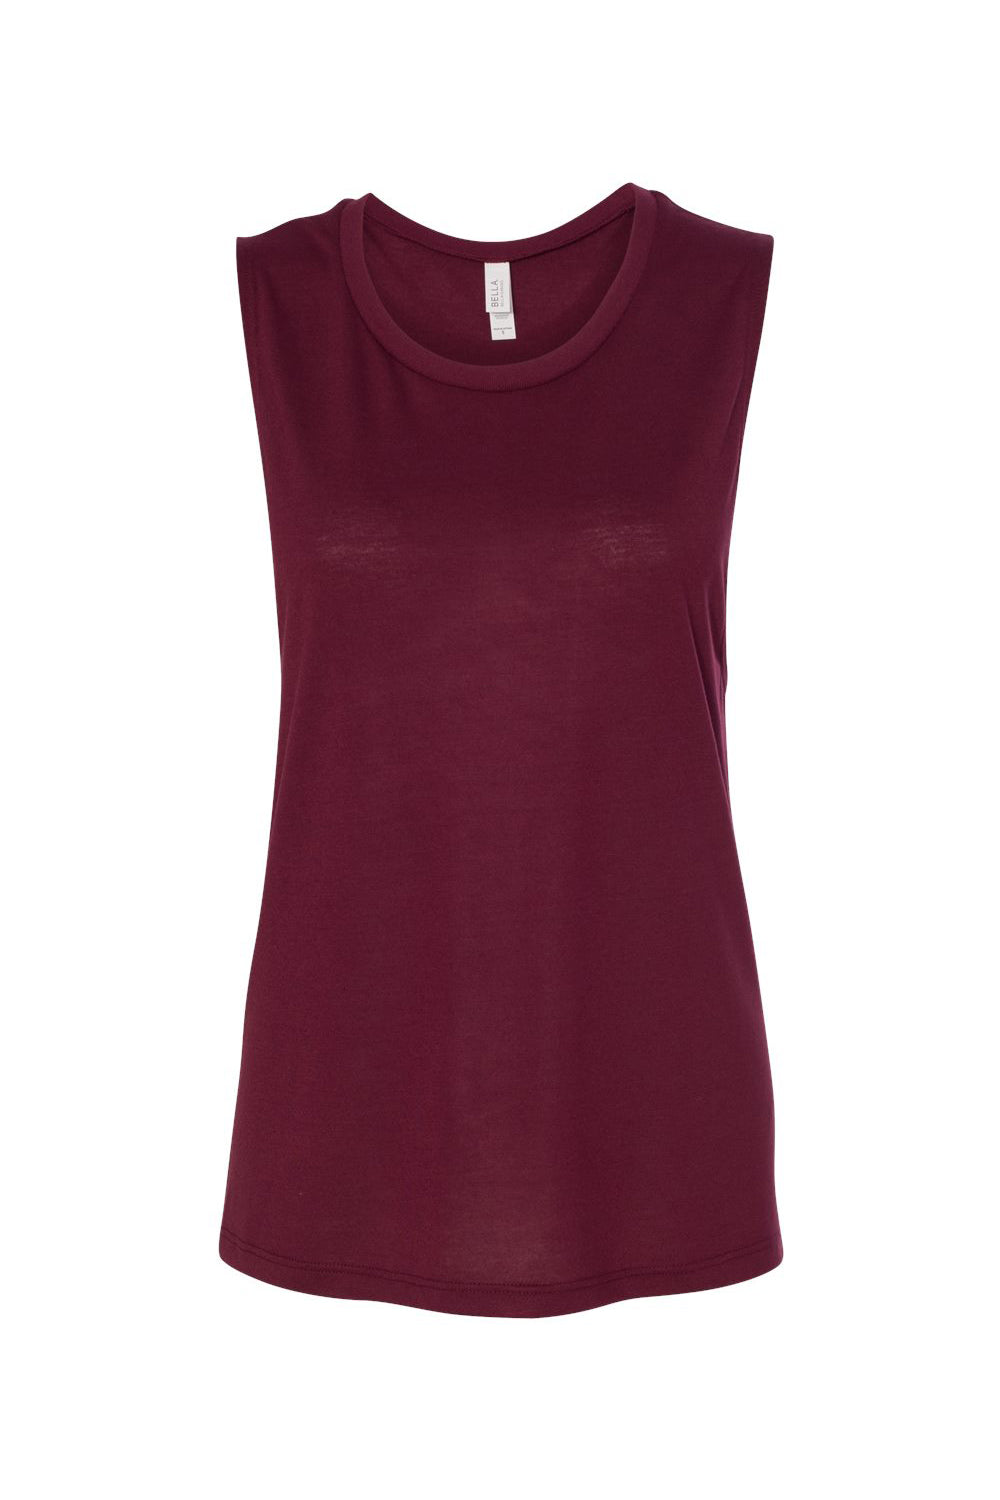 Bella + Canvas BC8803/B8803/8803 Womens Flowy Muscle Tank Top Maroon Flat Front